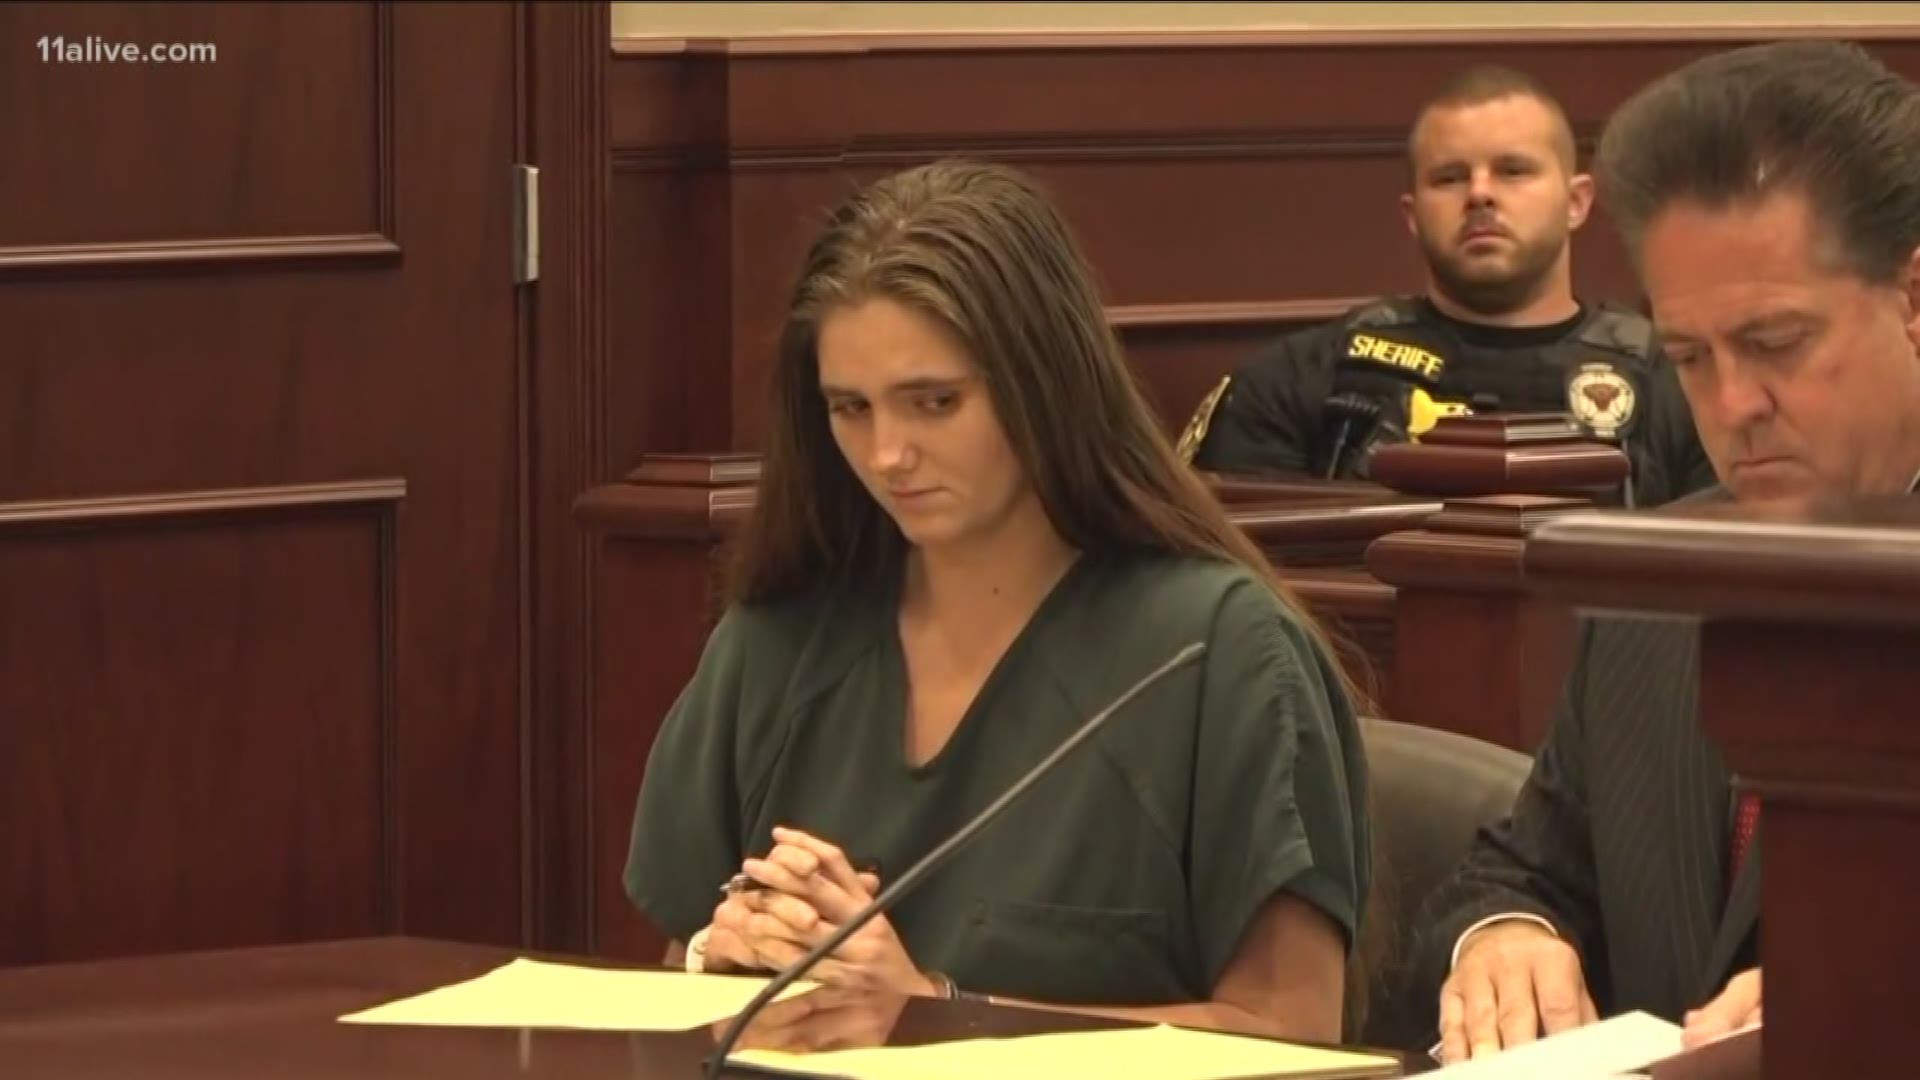 She's accused of witnessing a hitandrun and killing the driver. A